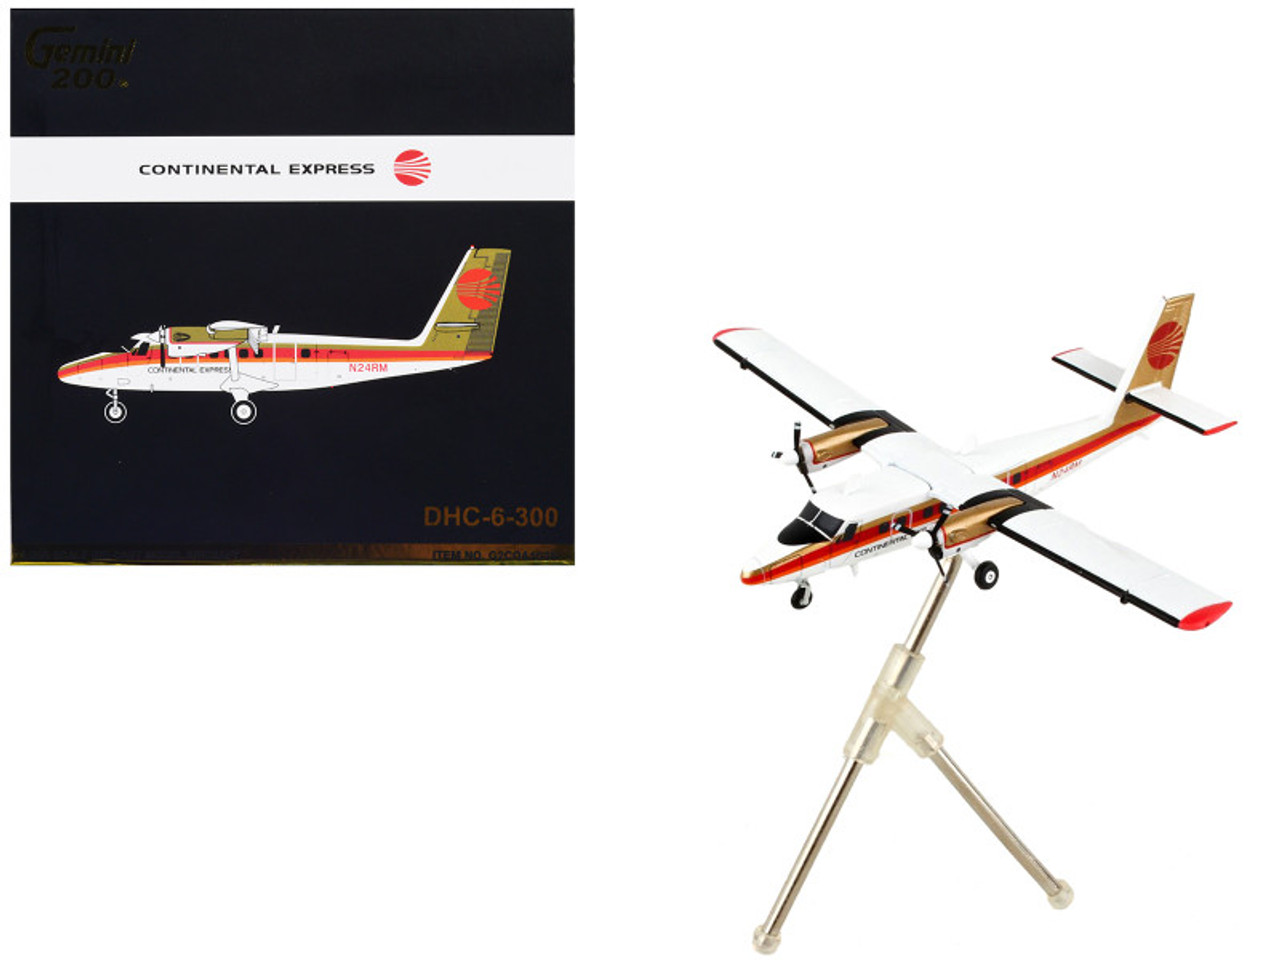 De Havilland DHC-6-300 Commercial Aircraft "Continental Express" White with Red Stripes and Gold Tail "Gemini 200" Series 1/200 Diecast Model Airplane by GeminiJets